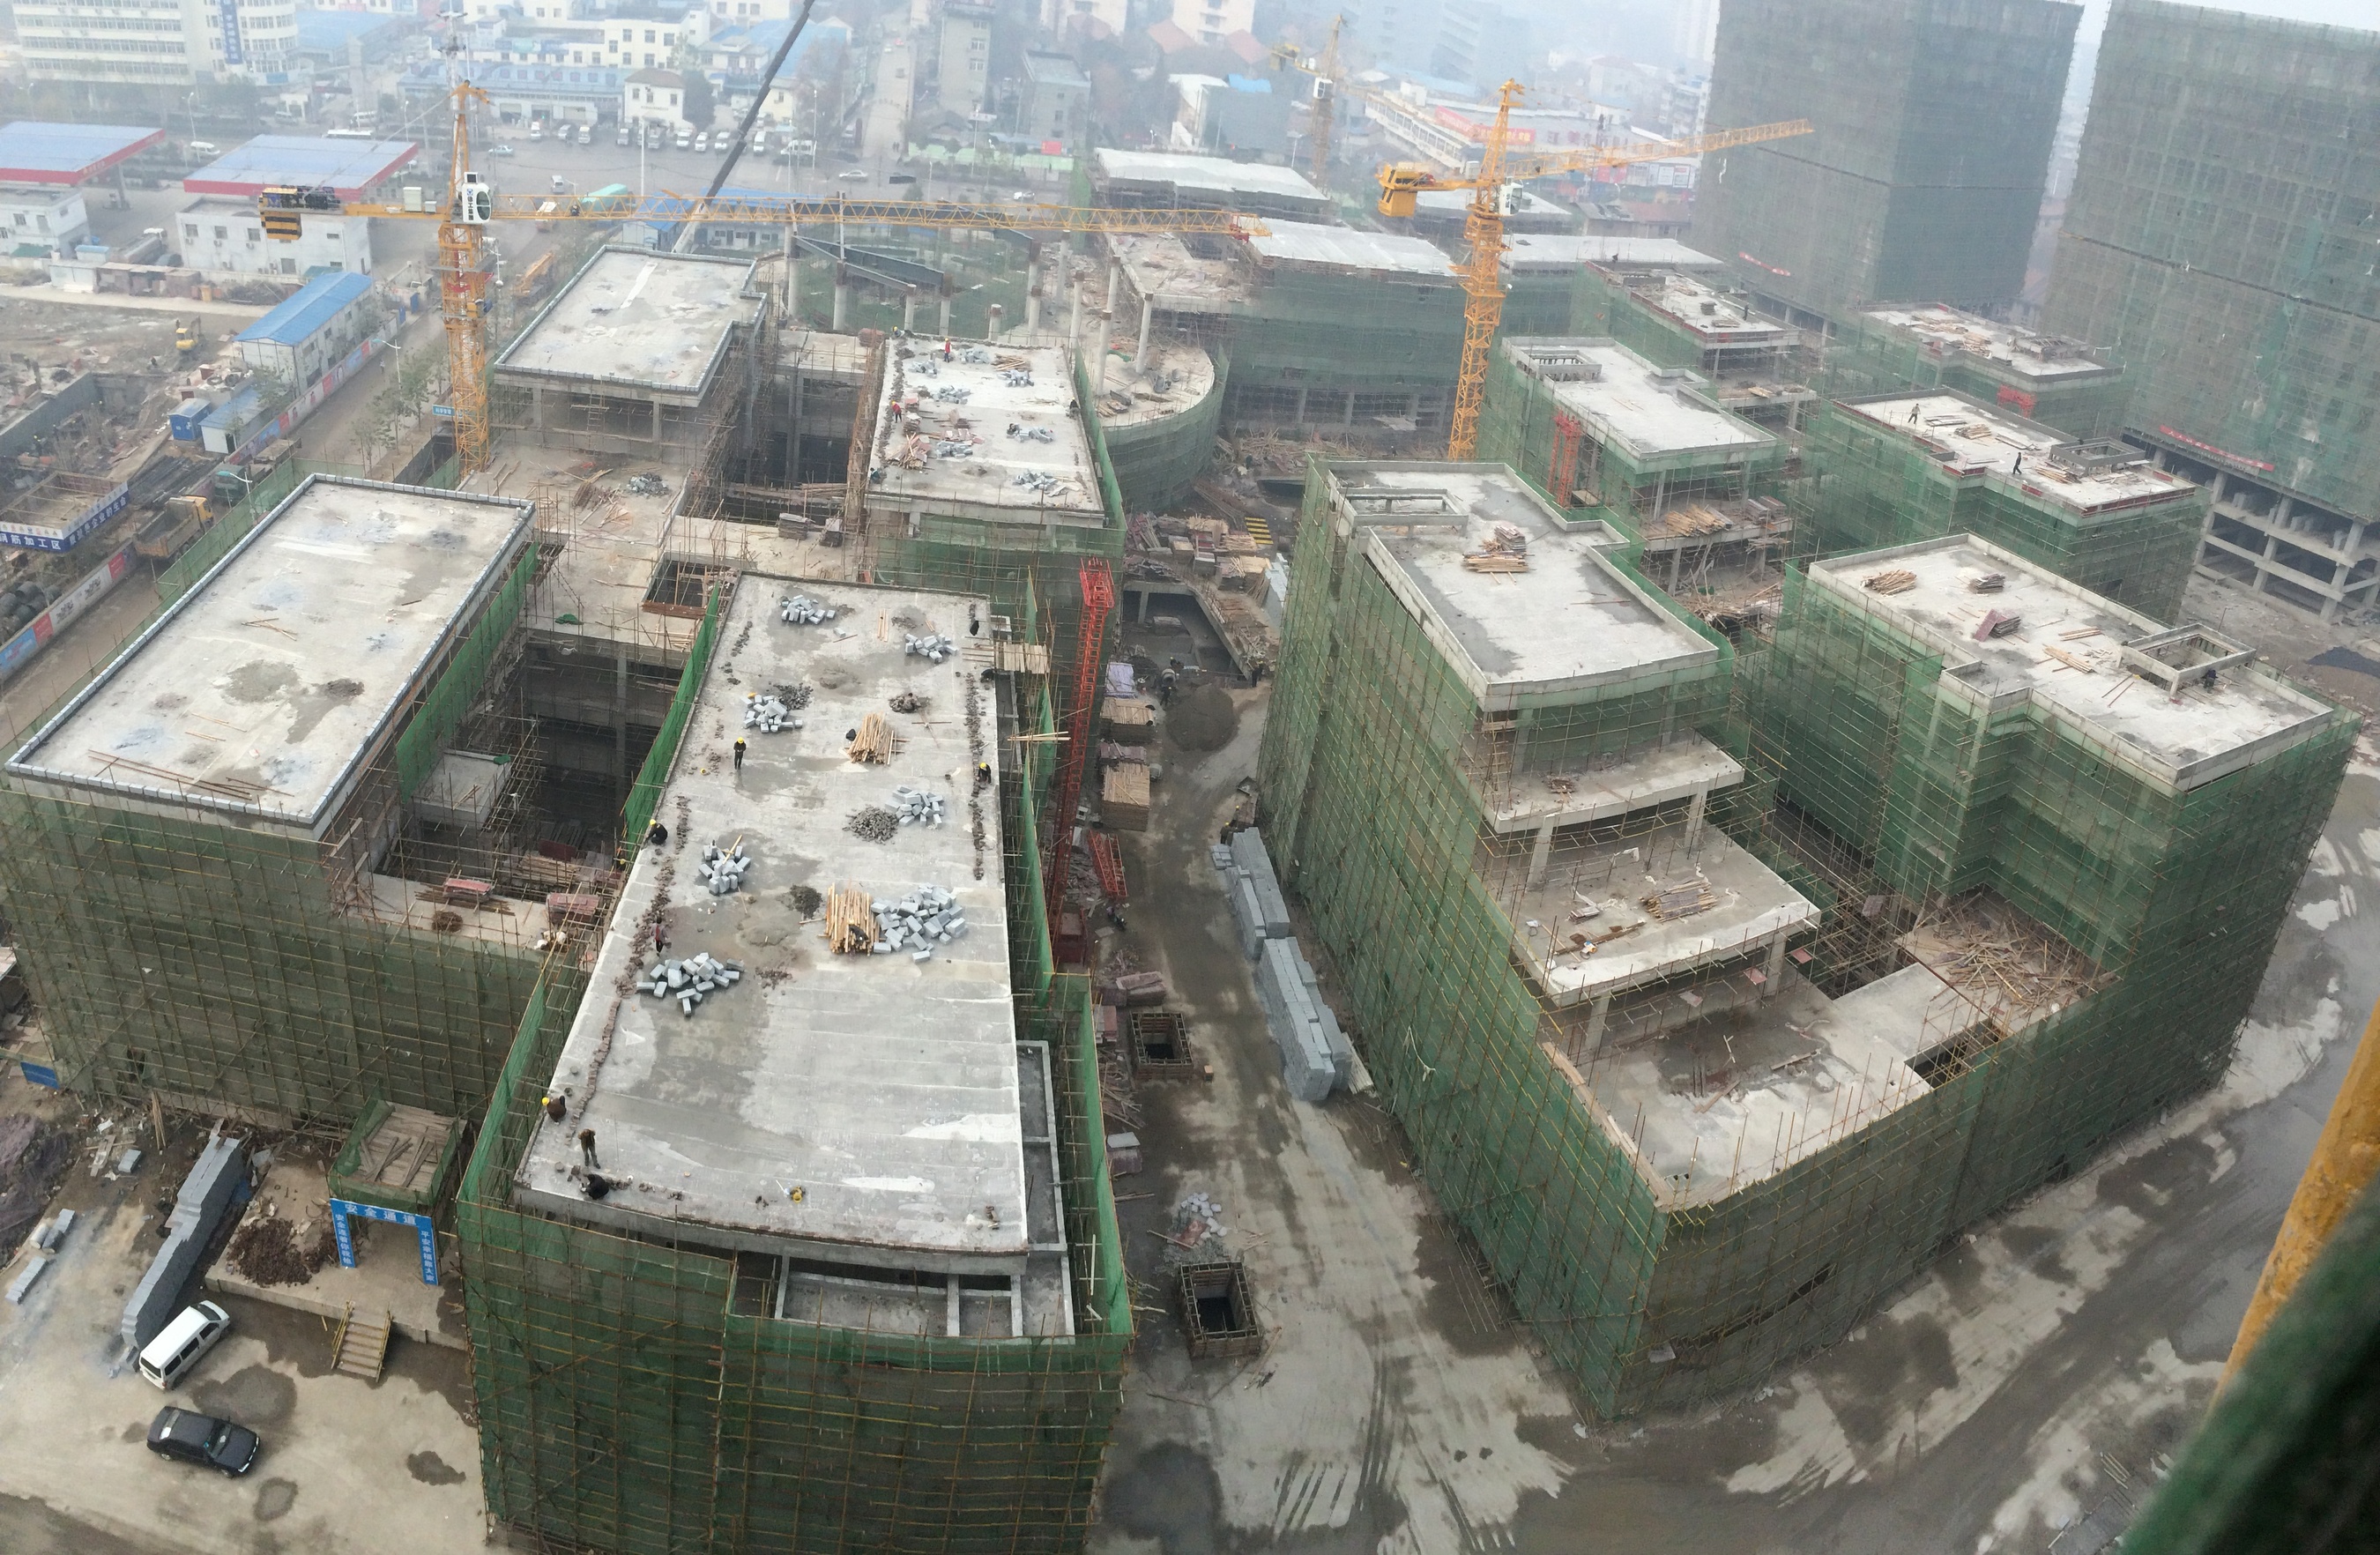 Construction at Kingold Jewelry International Industrial Park - Wuhan, China, January 20, 2015